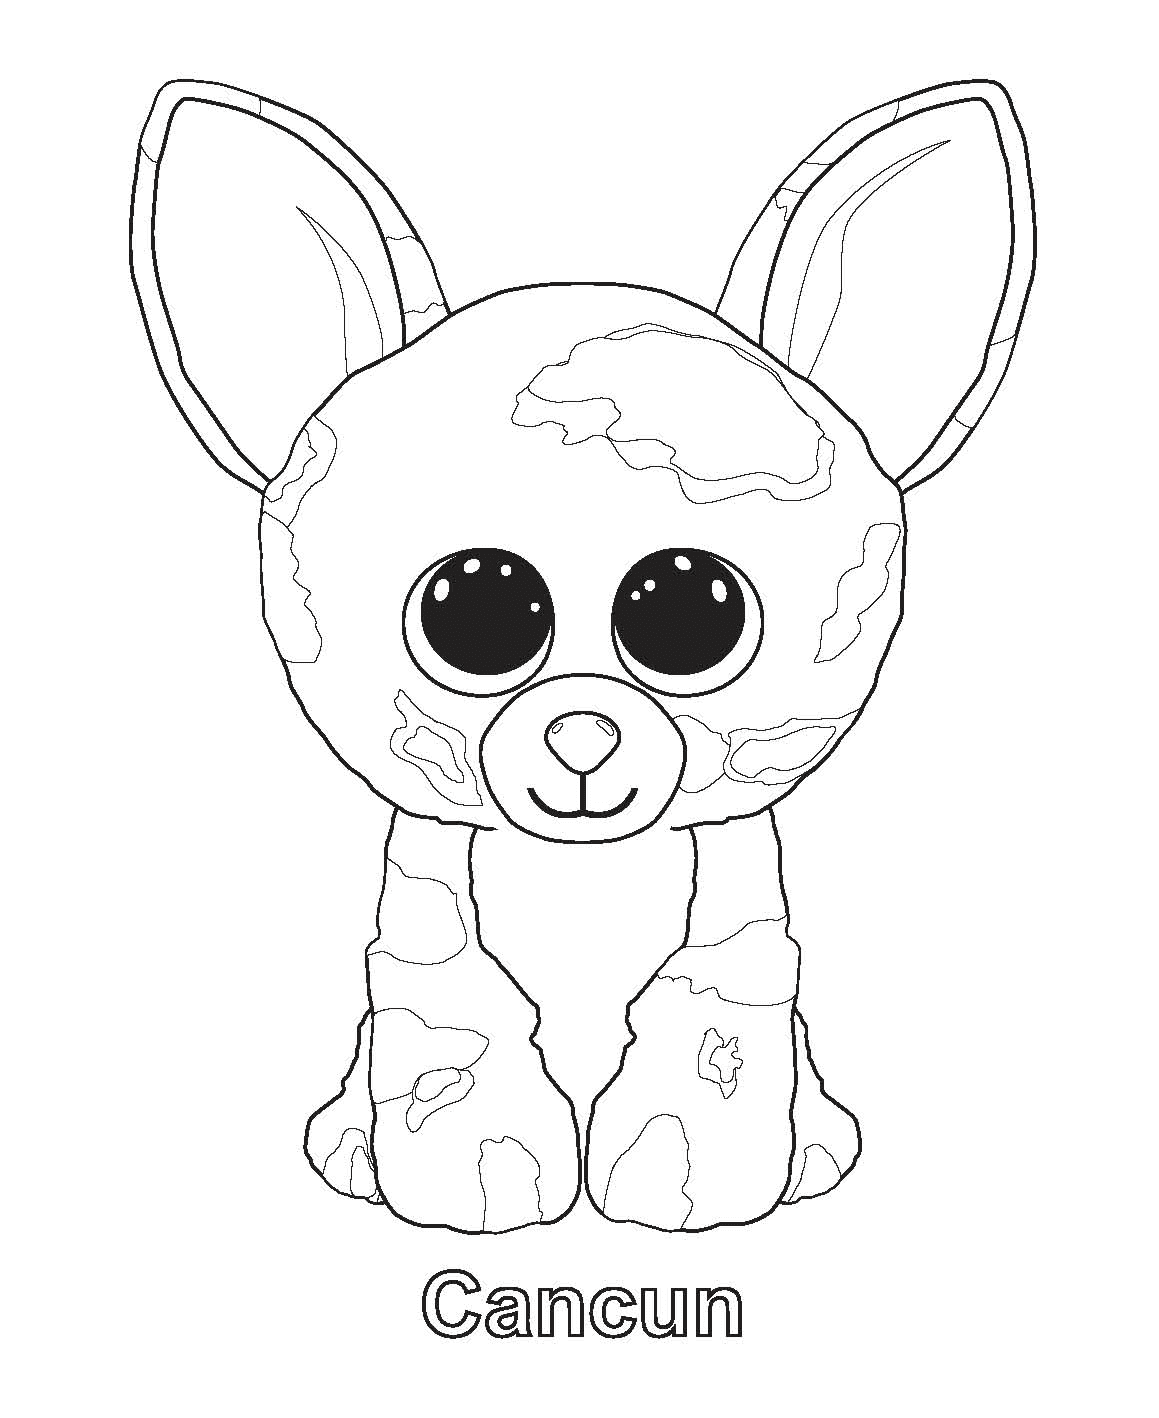 Cancun Beanie Boos Coloring Page